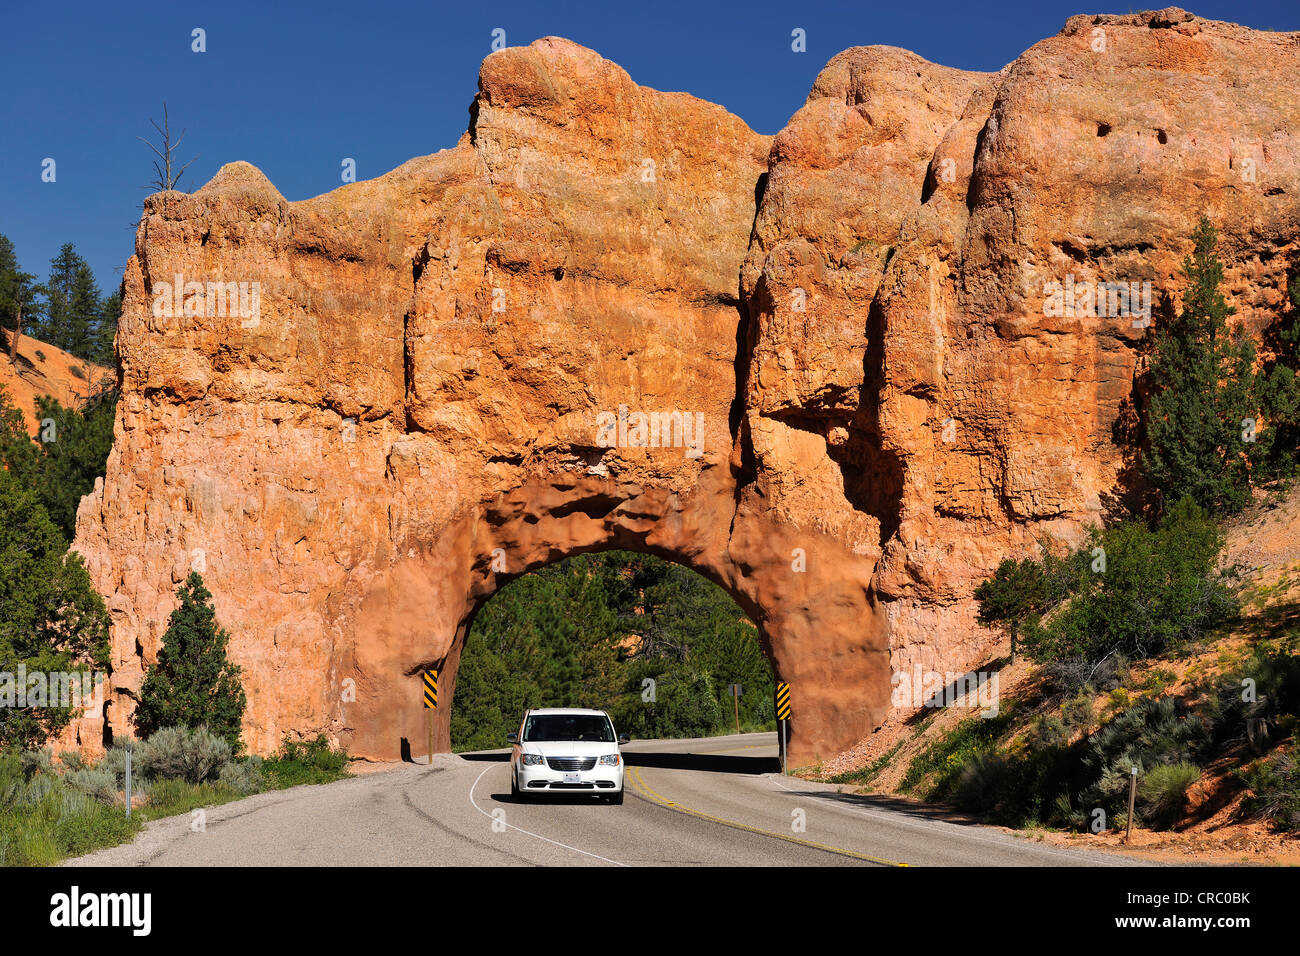 Arch Rock in a red rock formation, tunnel routier, Red Canyon, Utah, USA Banque D'Images